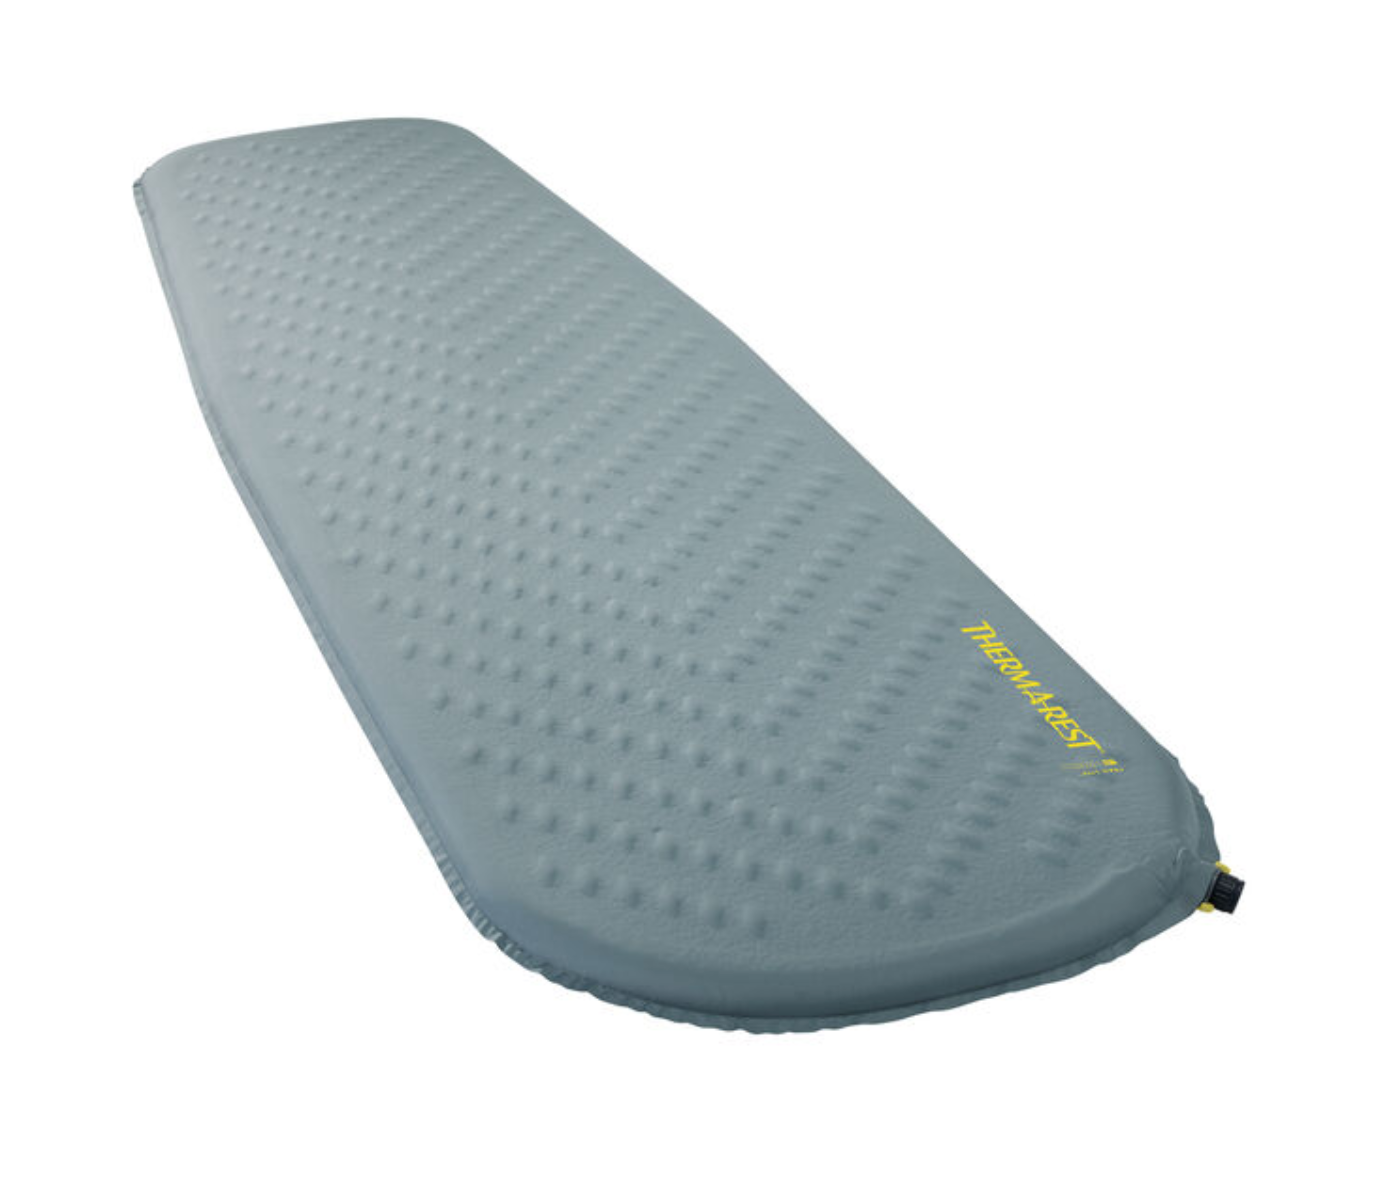 Rent this sleeping pad from Packlist, and have it delivered and picked up.